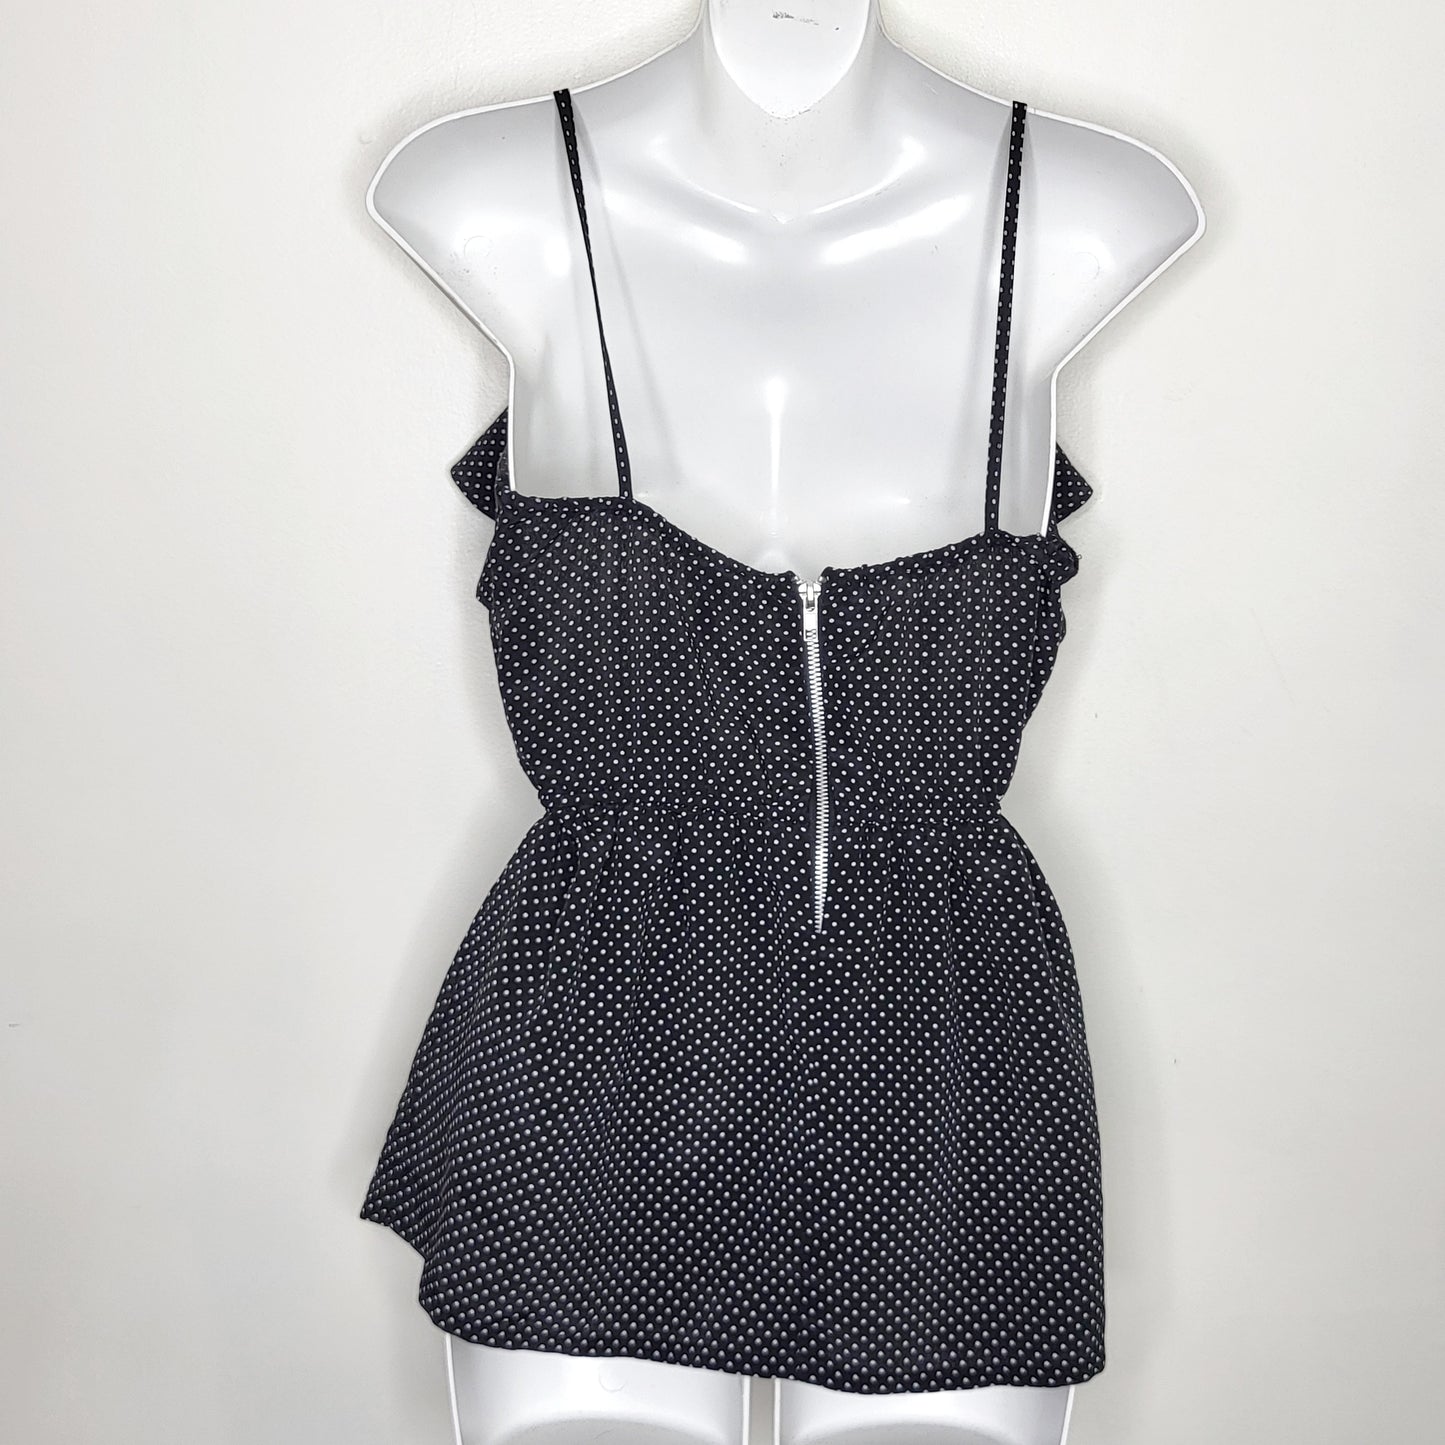 JRB1 - Made For Each Other black and white polka dot sleeveless top with ruffles.  Size small